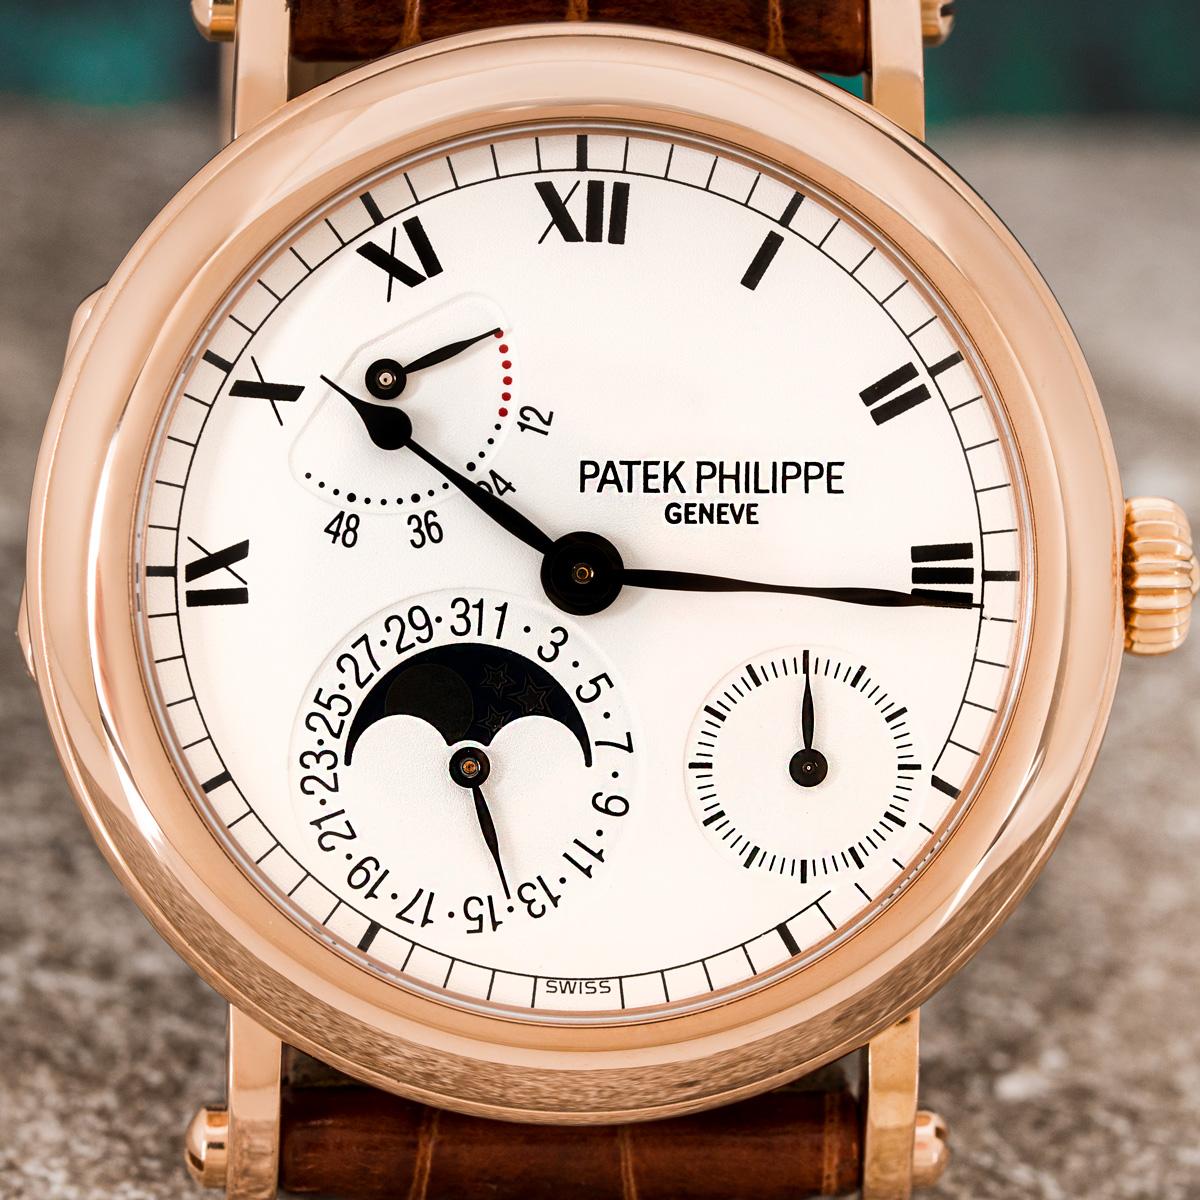 A rose gold power reserve moonphase wristwatch by Patek Philippe. Features a white dial with roman numerals, 2 sub-dials featuring a small second and date as well as a moonphase indicator and power reserve.

Fitted with a sapphire glass and a